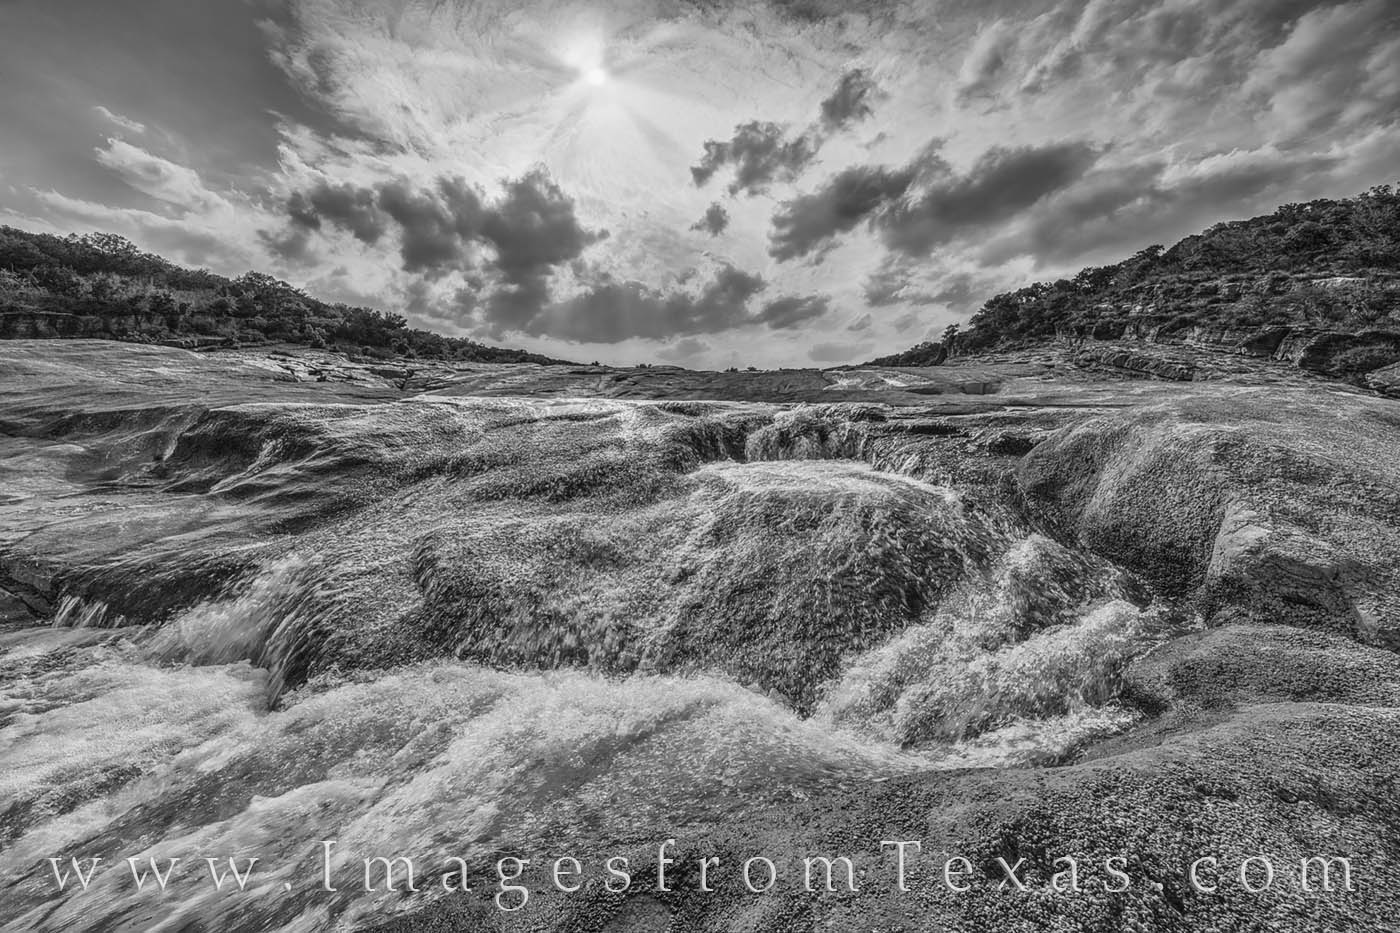 From the Pedernales Falls River Basin, this black and white image was taken on an afternoon that offered some unique cloud formatoins...